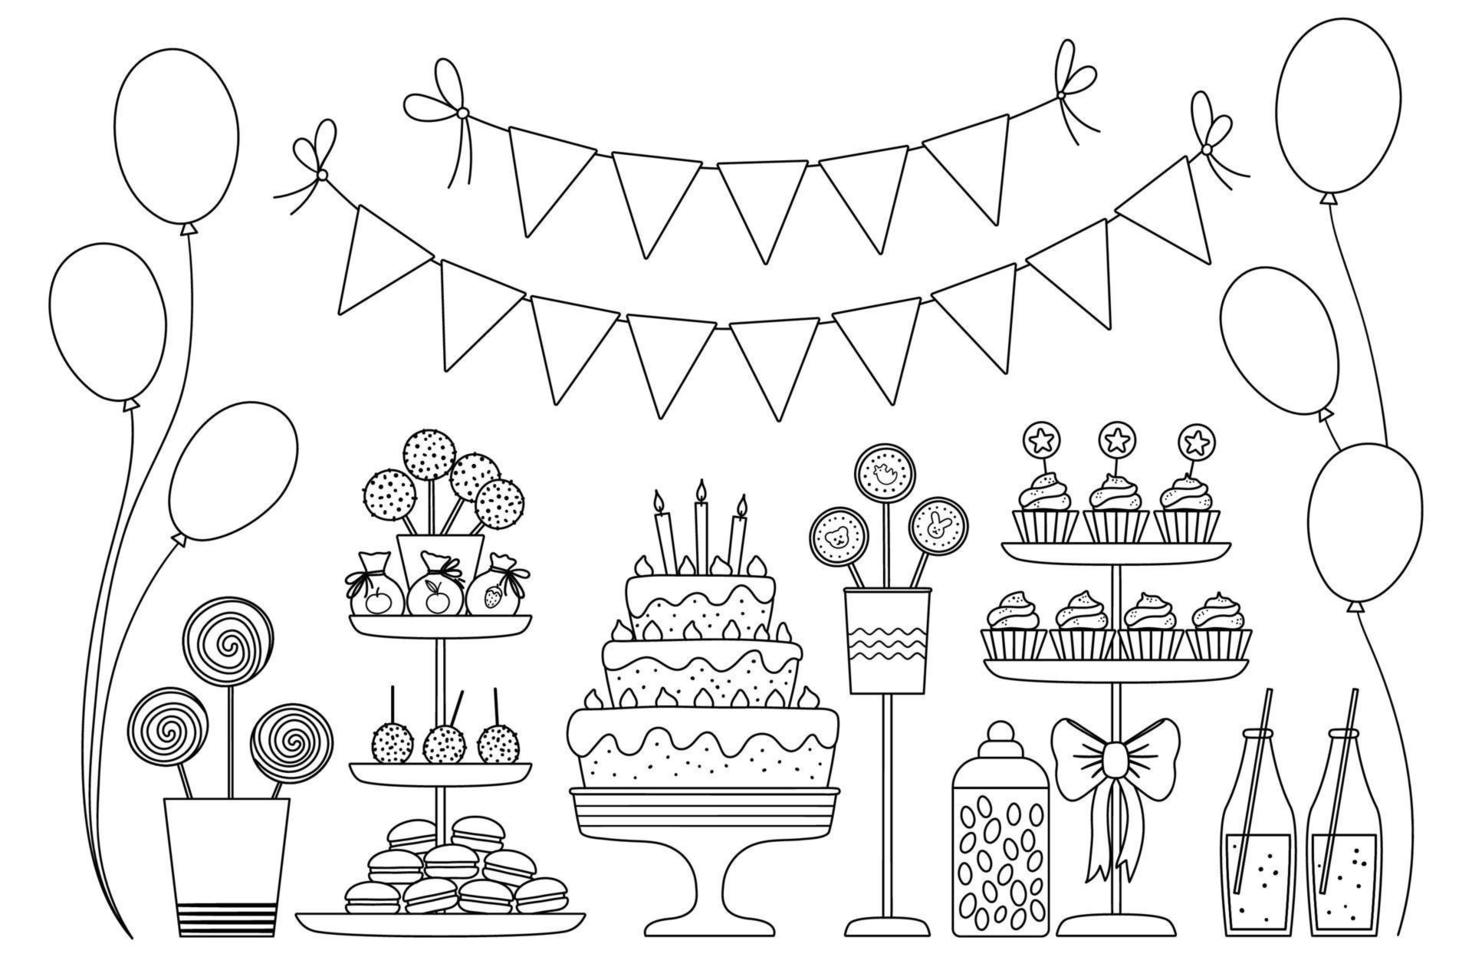 Vector black and white candy bar. Cute outline birthday meal with cake, candles, cupcakes, cake pops, jelly beans, flags. Funny dessert illustration for card, poster, print design. Holiday line icons.